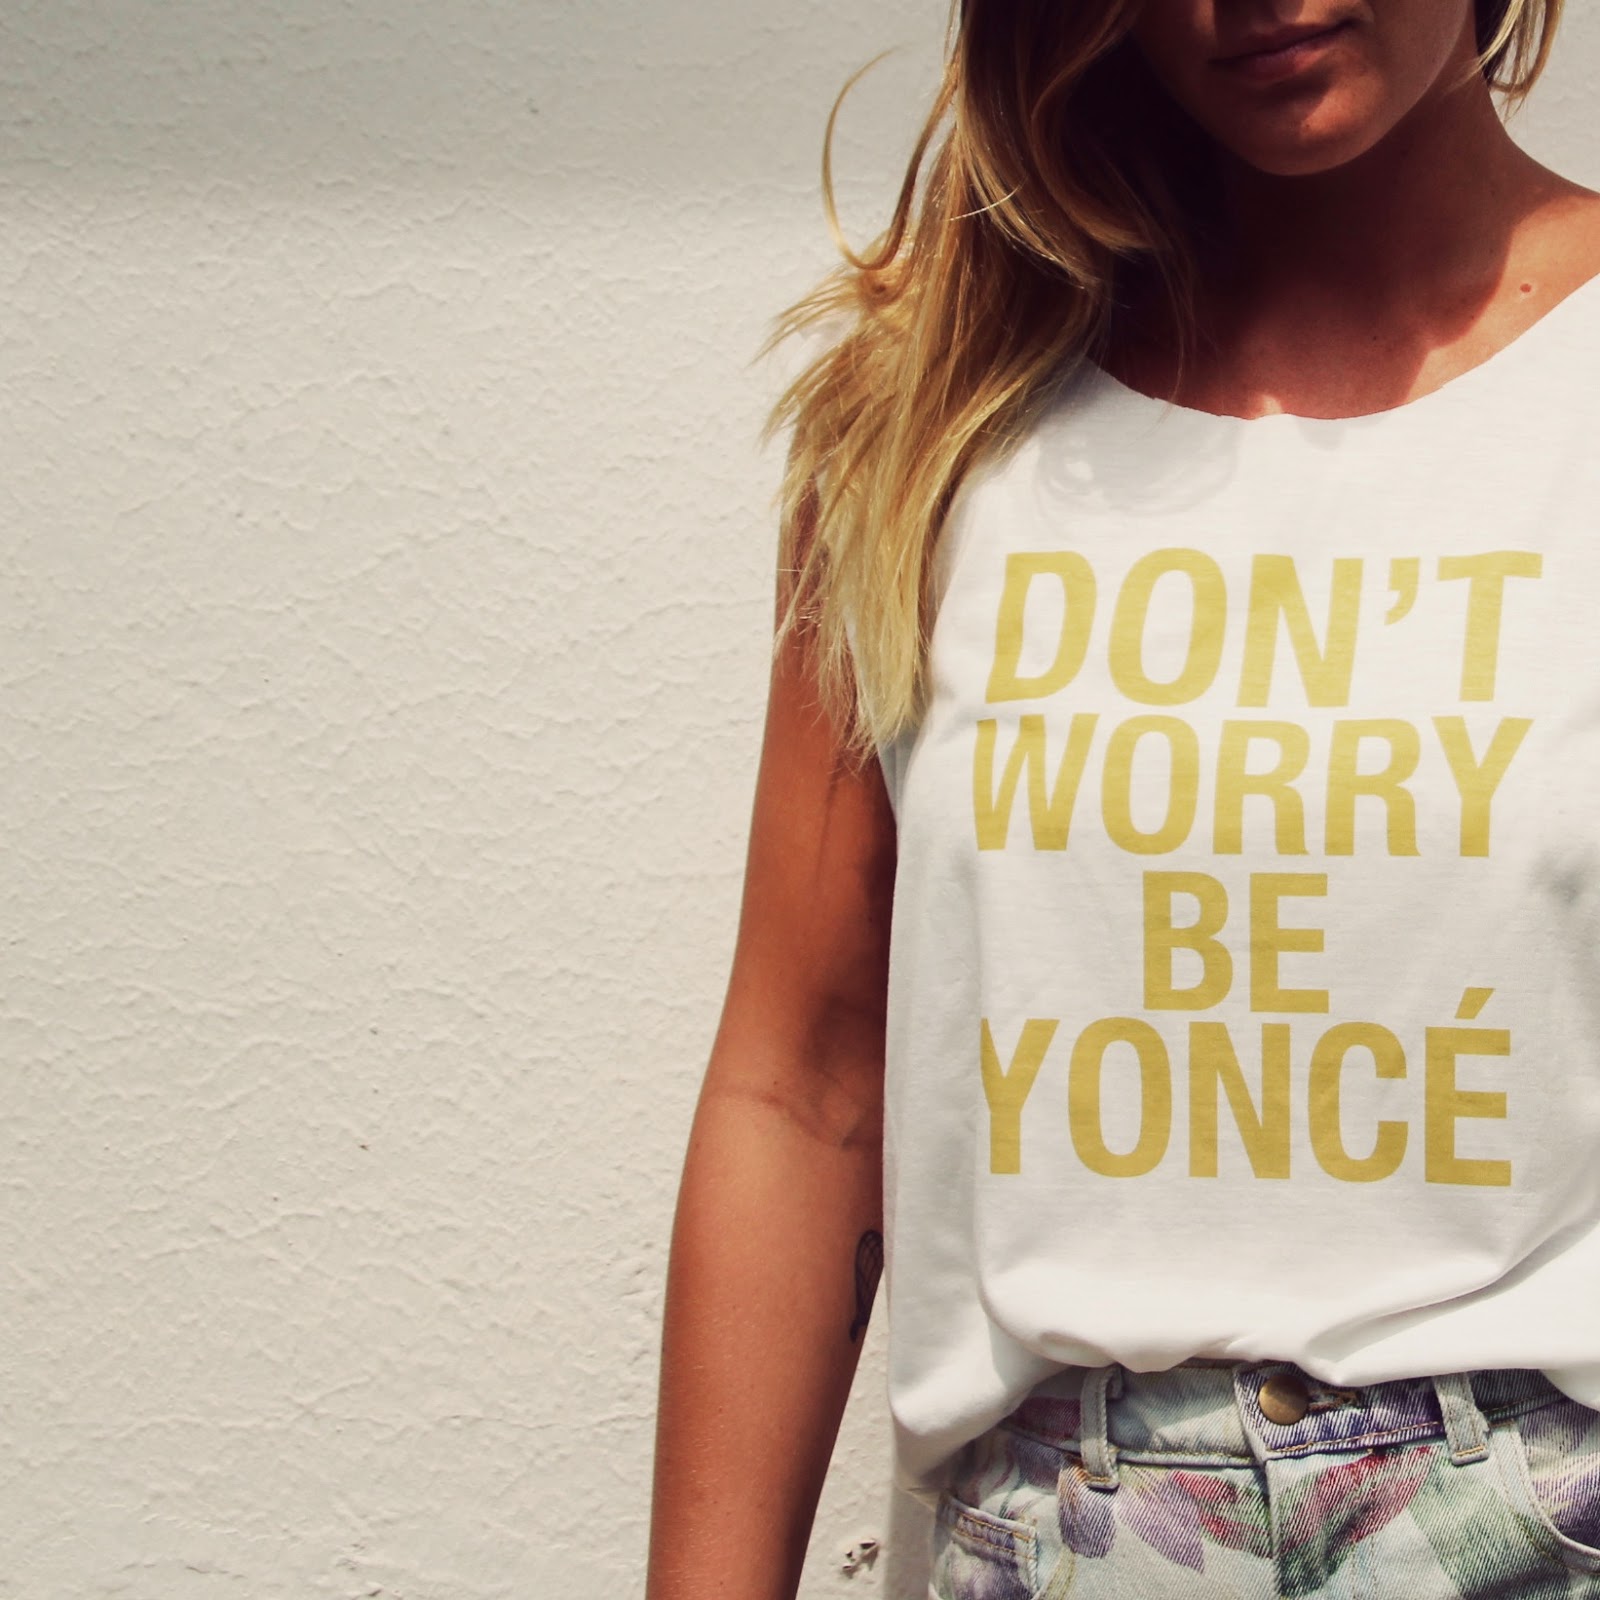 https://www.etsy.com/listing/199341448/dont-worry-be-yonce?ref=listing-shop-header-0